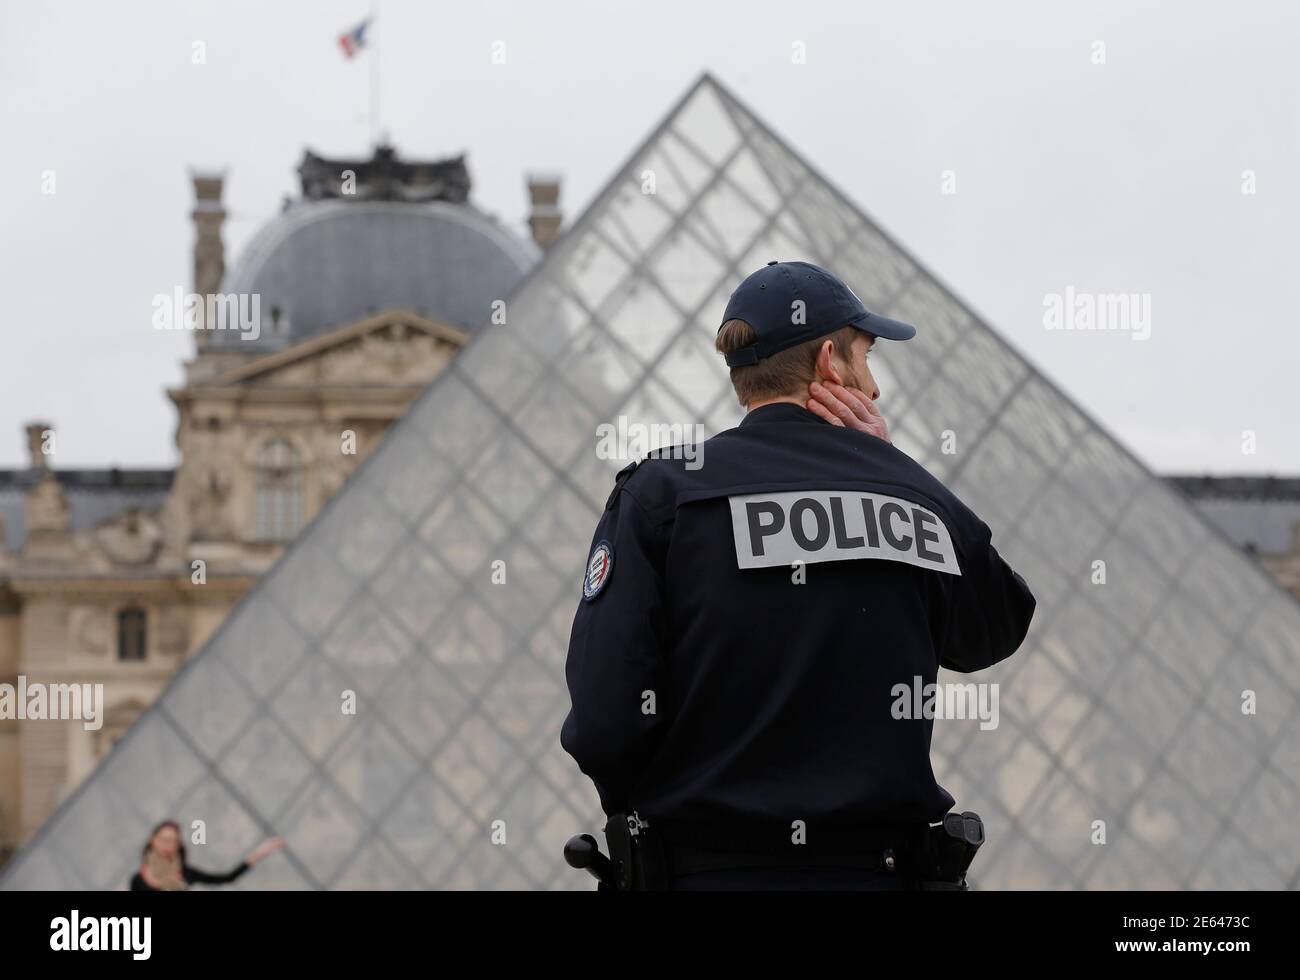 A French police officer patrols next to the Pyramid in the Louvre museum in  Paris April 11, 2013 a day after a one-day closure of the Louvre, as guards  protested that pickpockets